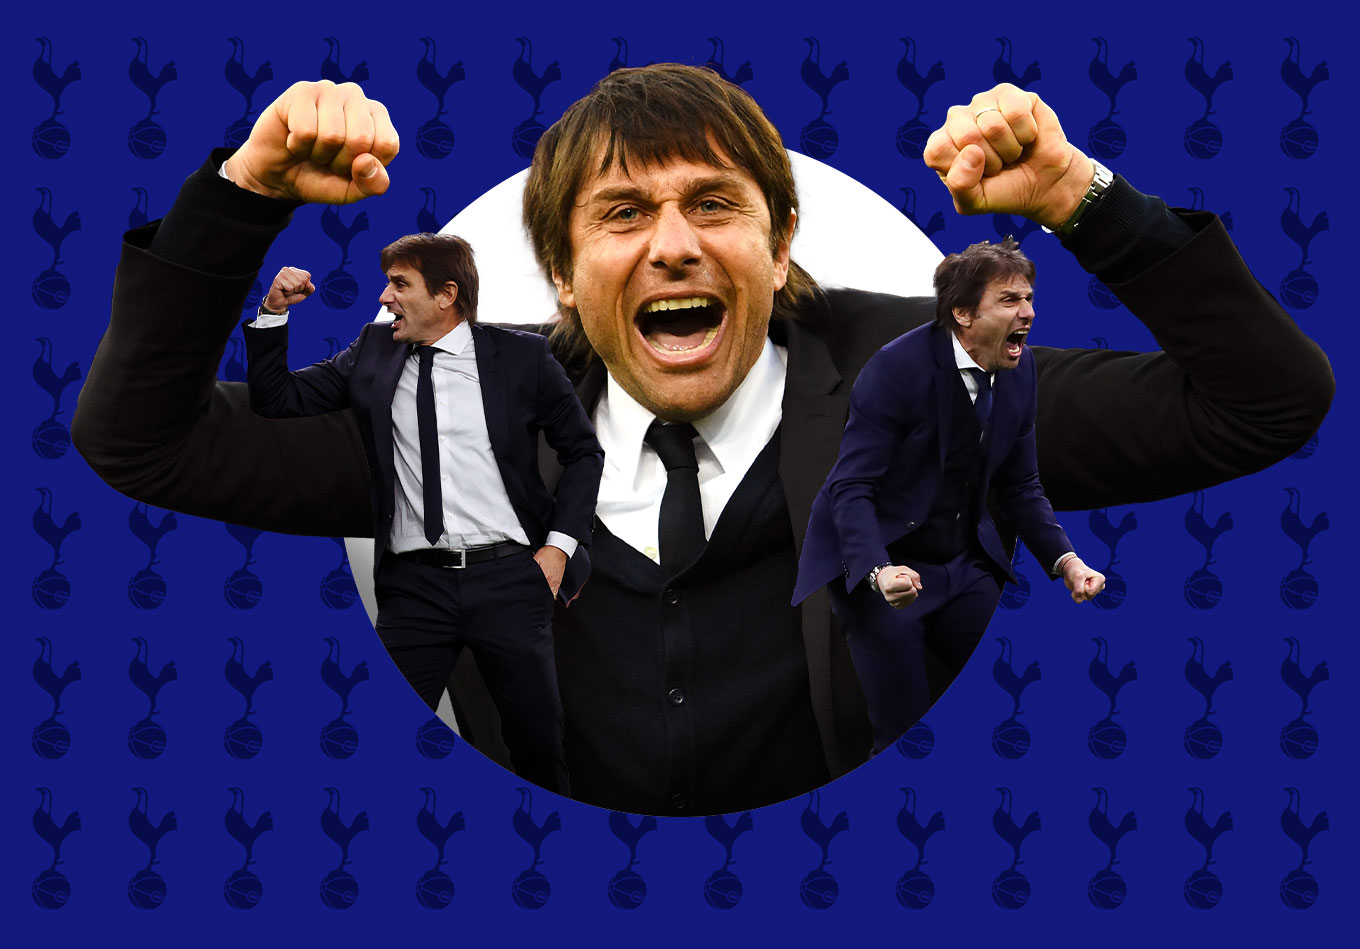 While There Are Still Issues to Fix, Conte Has Already Drastically Improved Tottenham | The Analyst